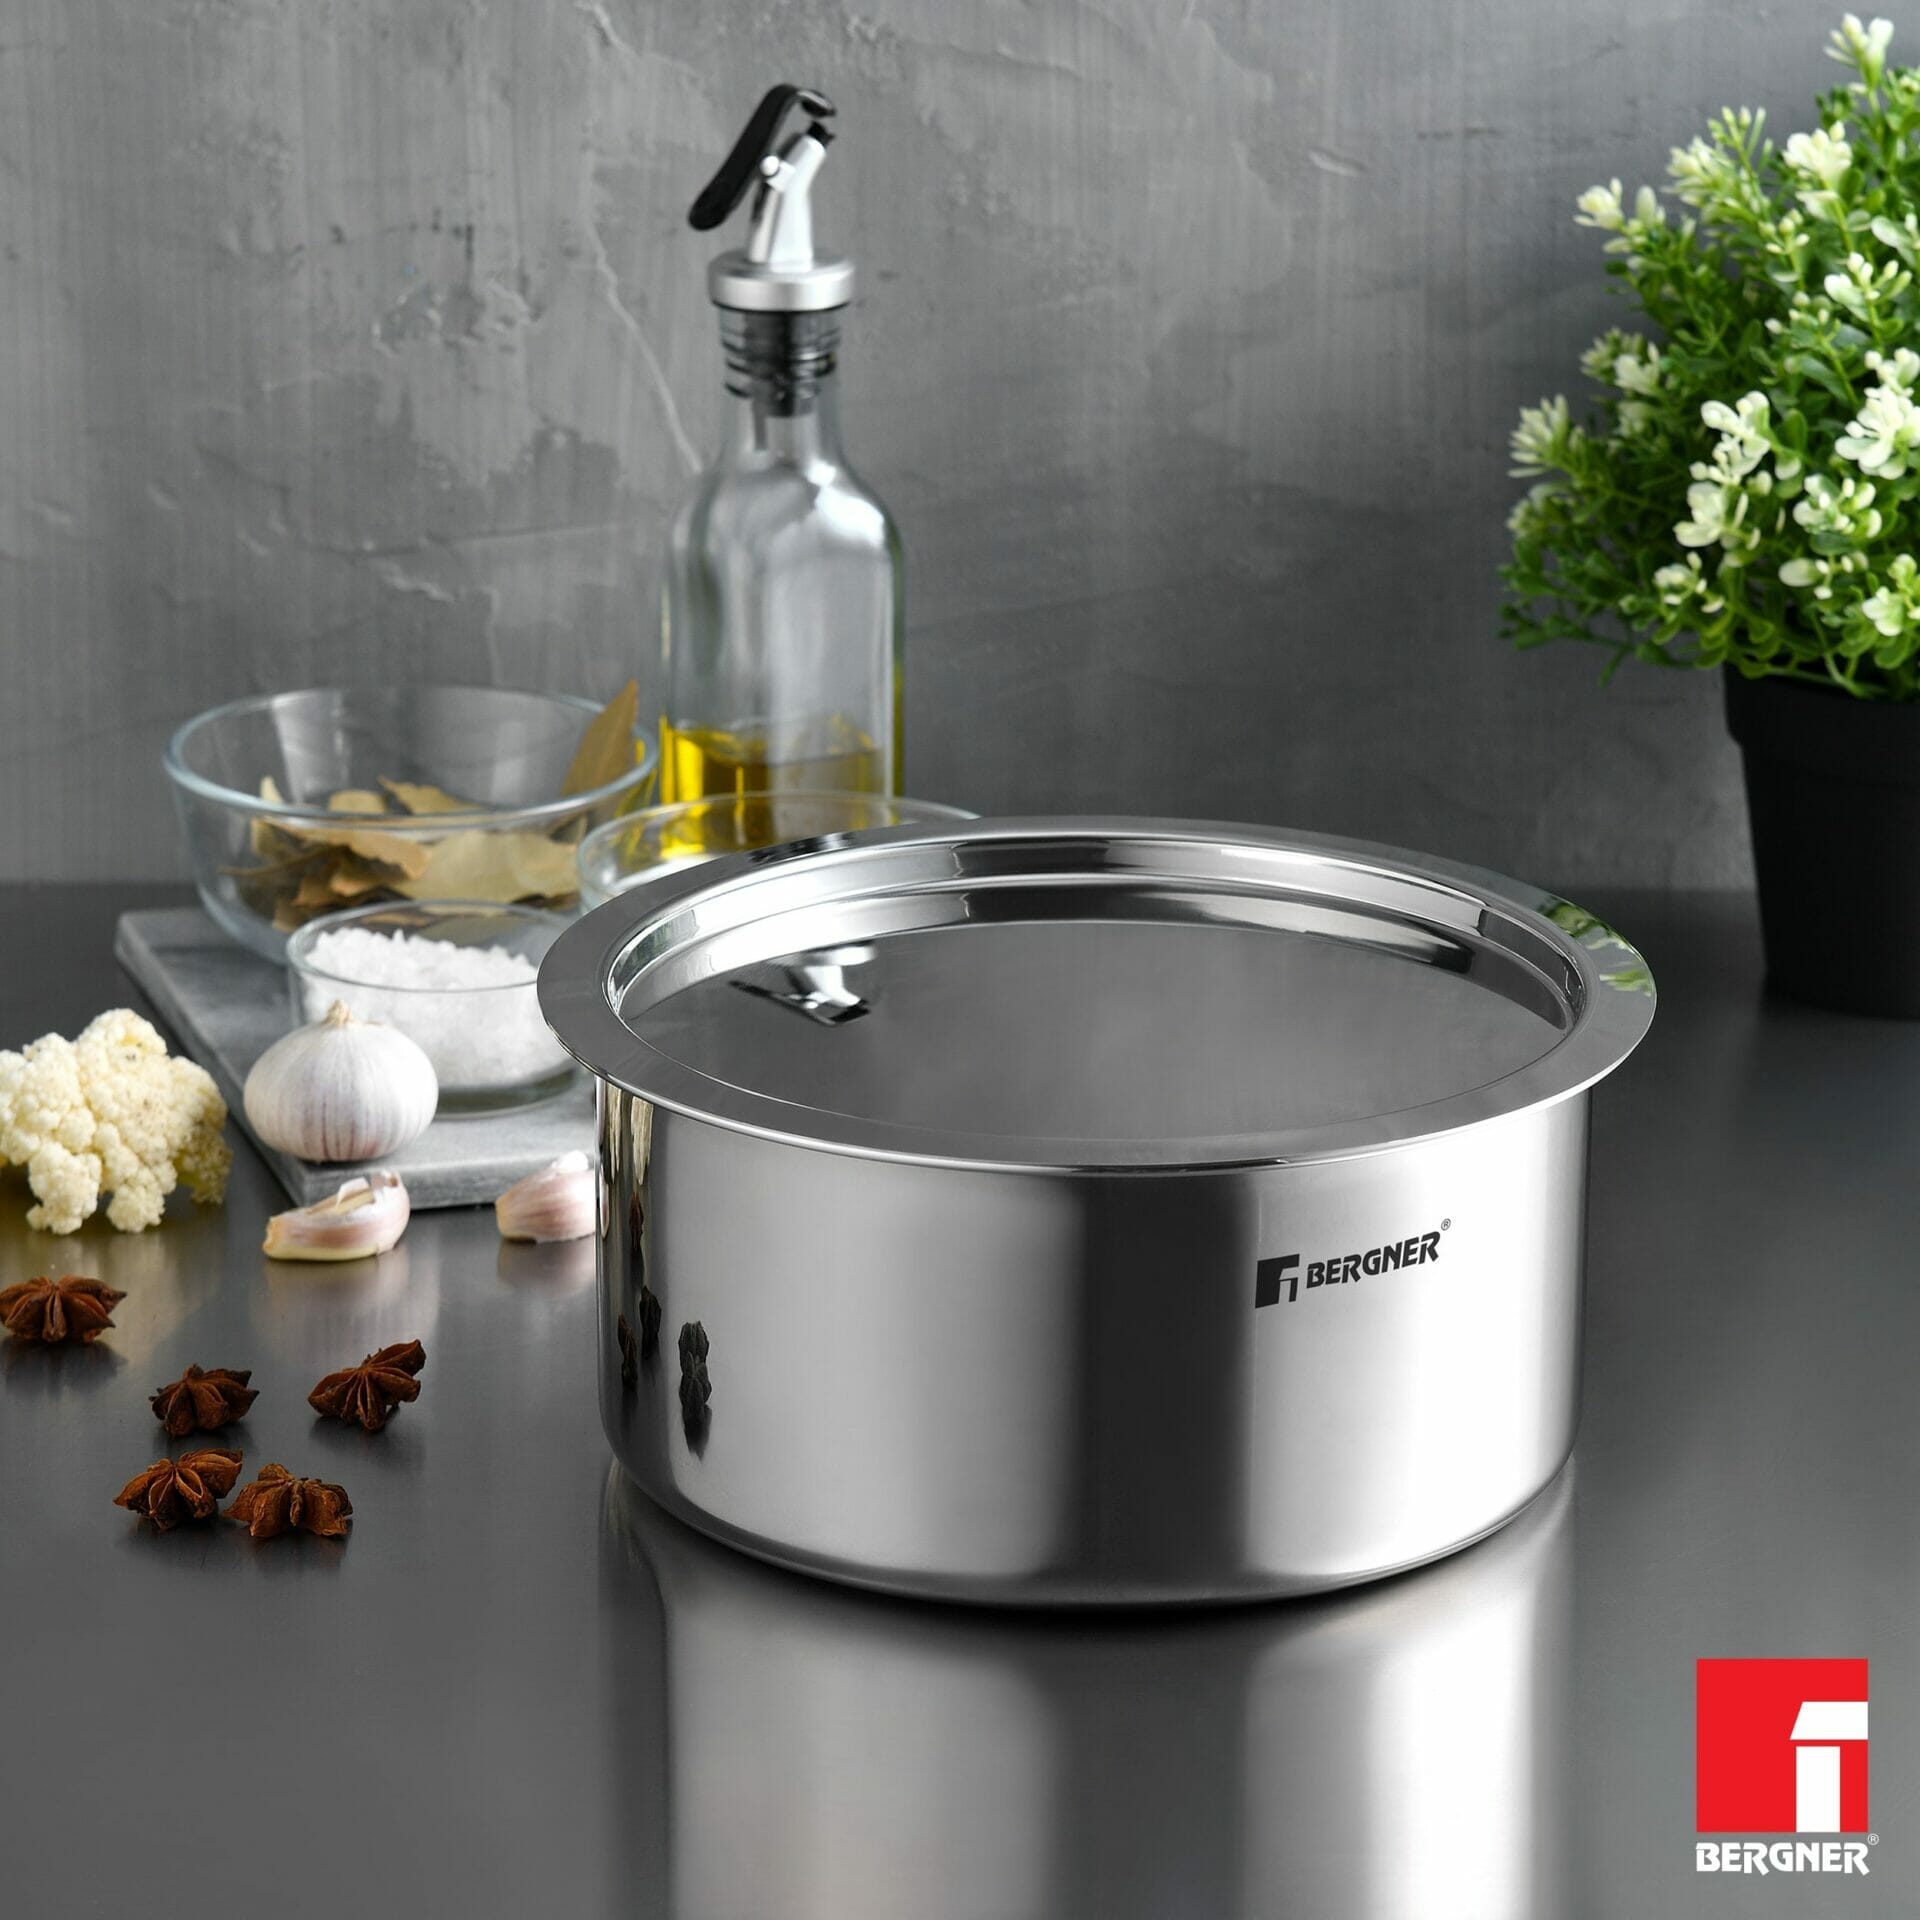 Bergner Triply Stainless Steel Tope with Stainless Steel Lid, Silver